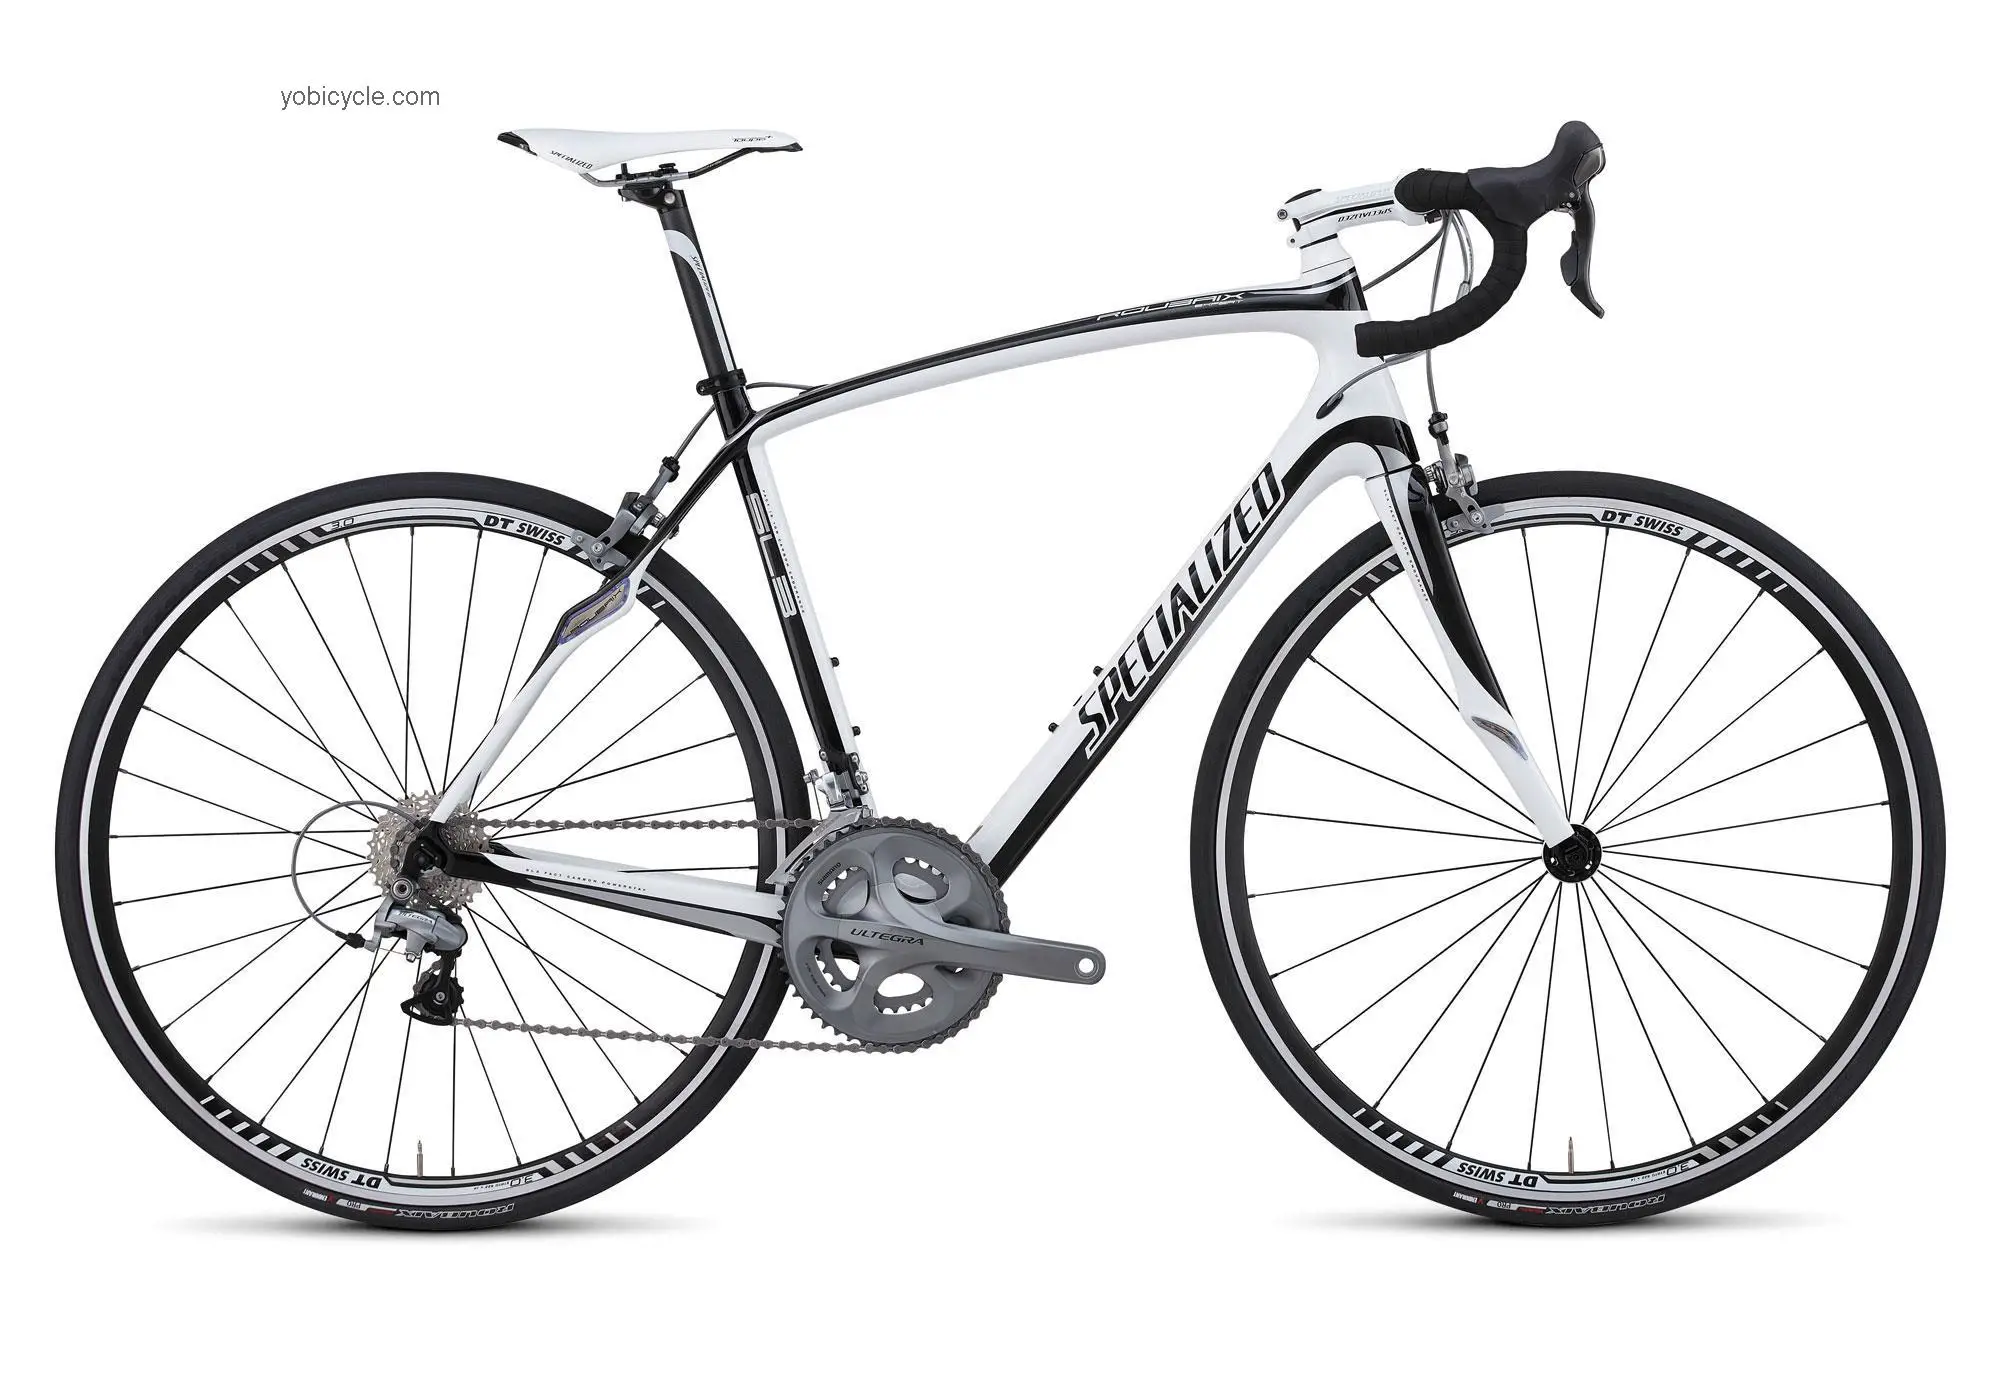 Specialized Roubaix SL3 Expert Compact competitors and comparison tool online specs and performance